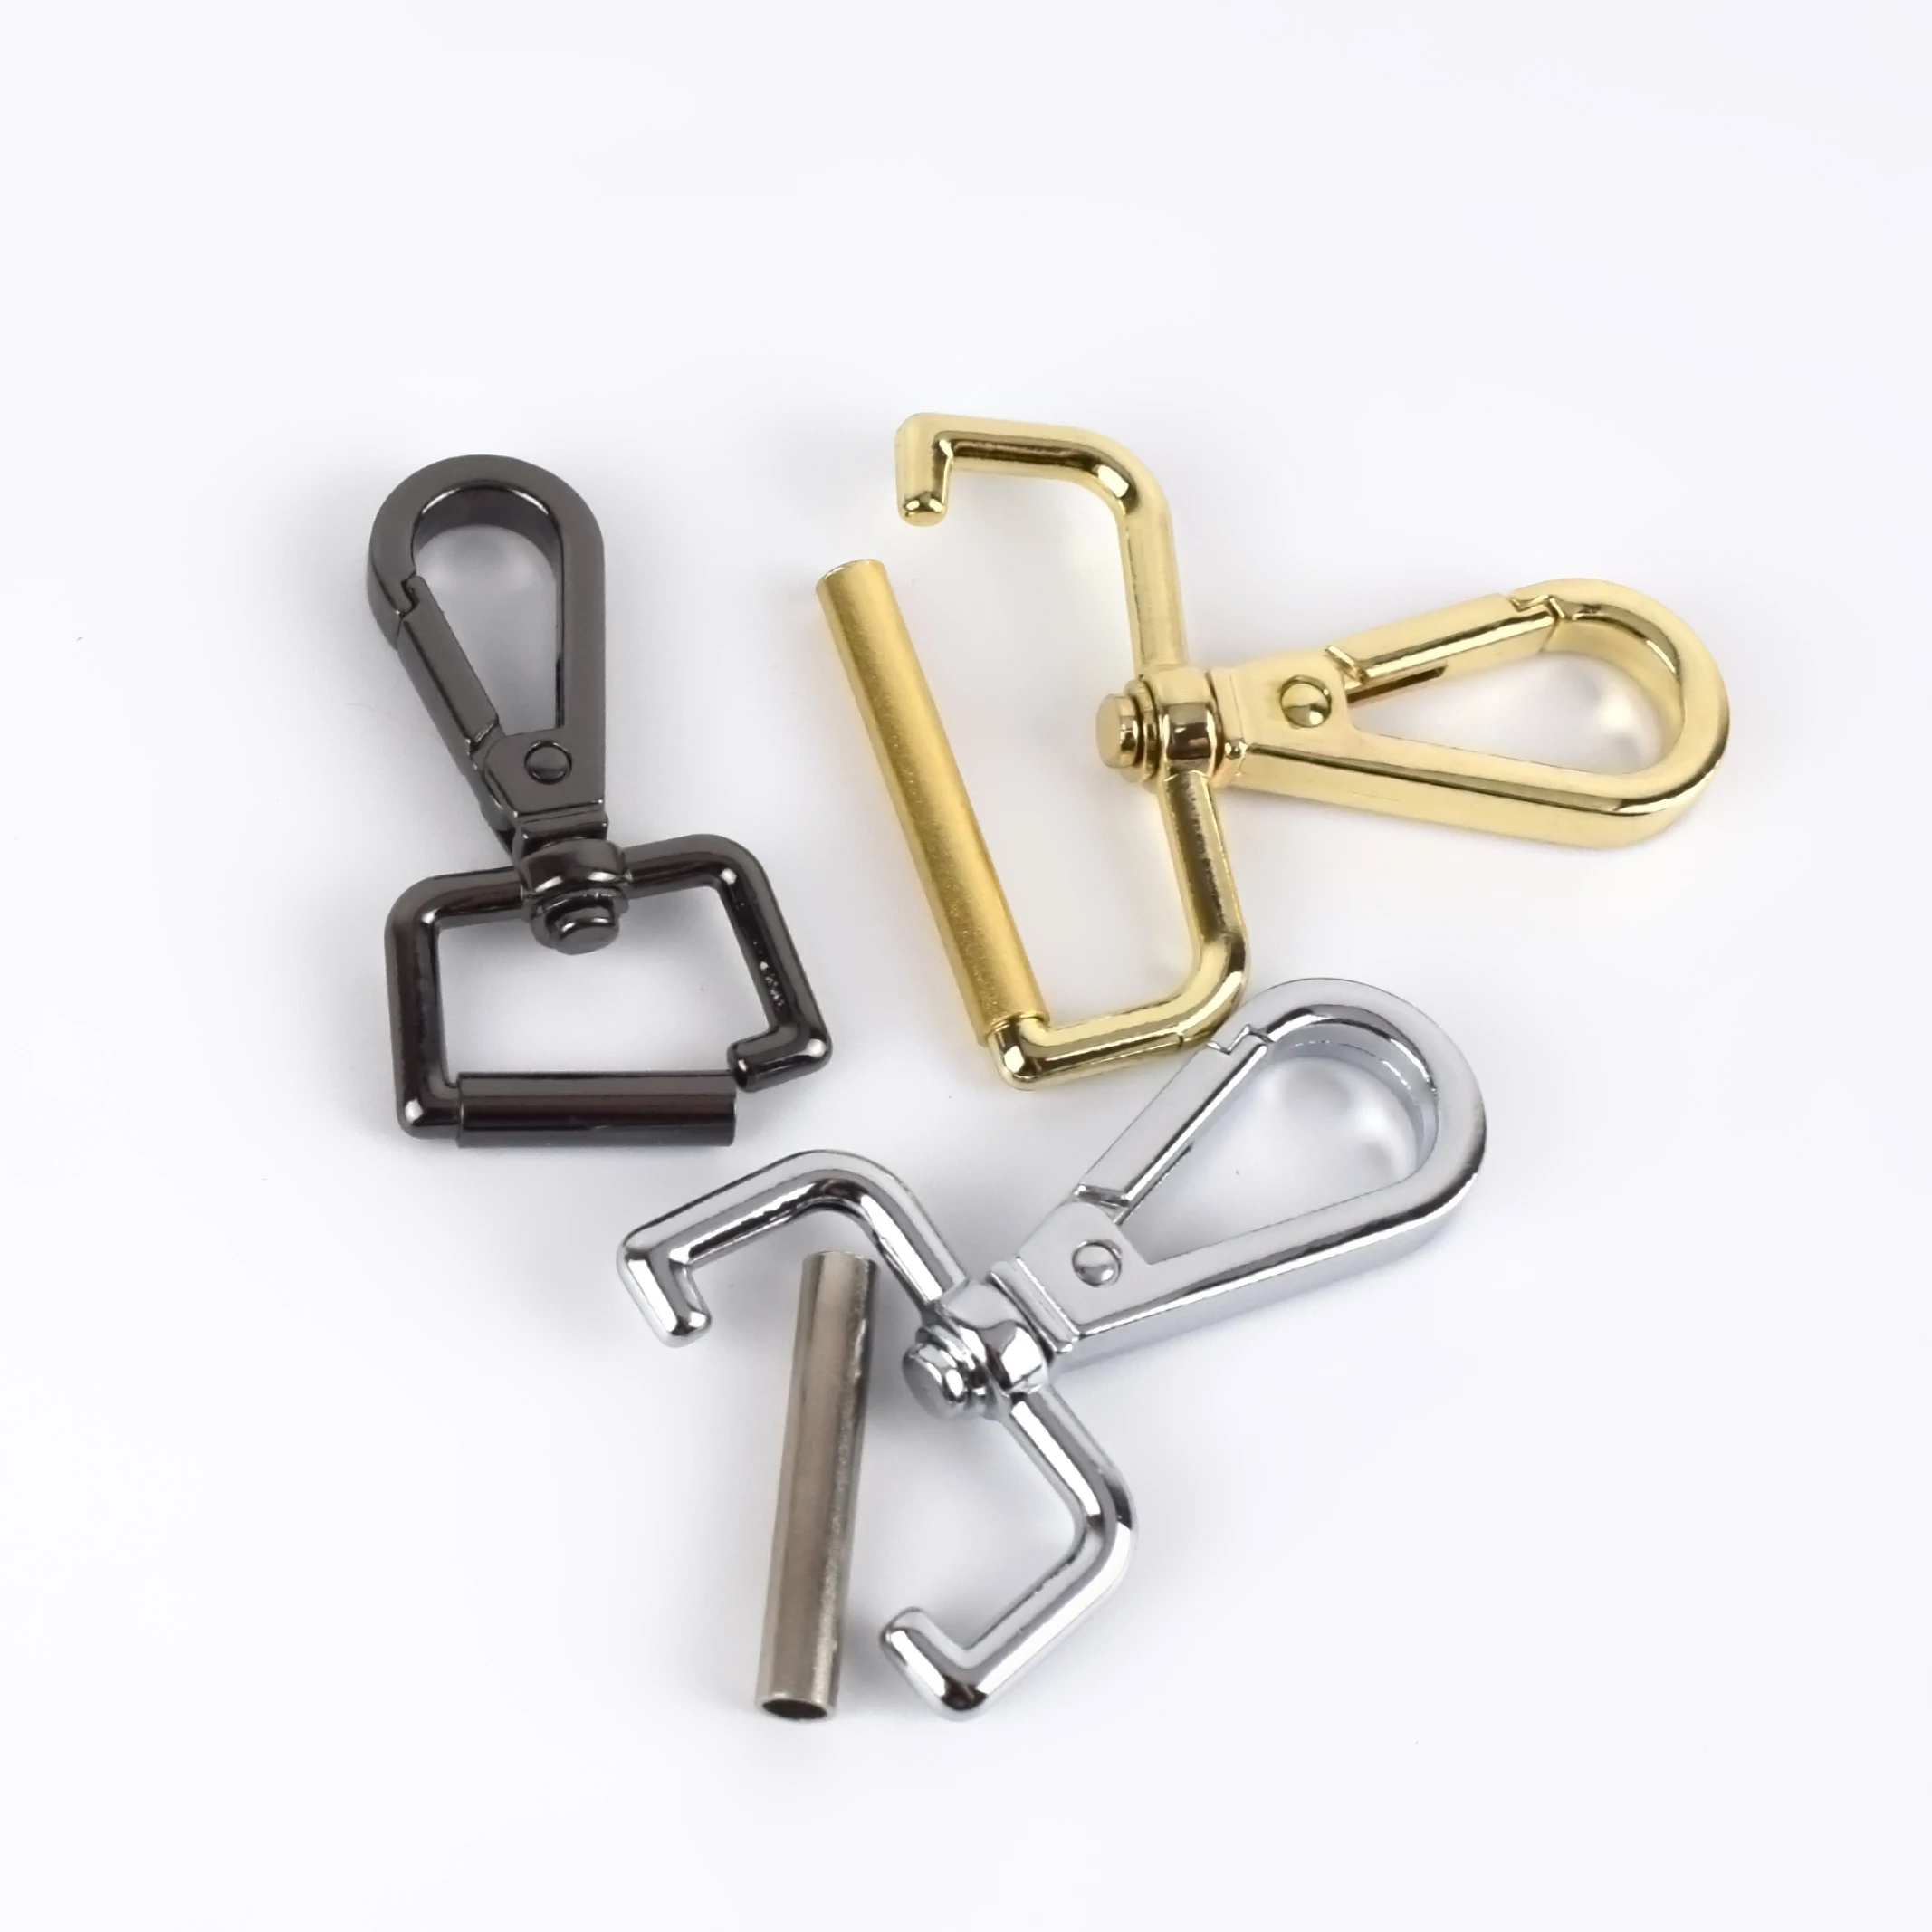 

Meetee BD051 13-38mm Alloy Swivel Hook Buckle Replacement Lobster Clasp Snap Hook Diy Shoulder Strap Buckle for Bag Accessories, Silver gold gun black